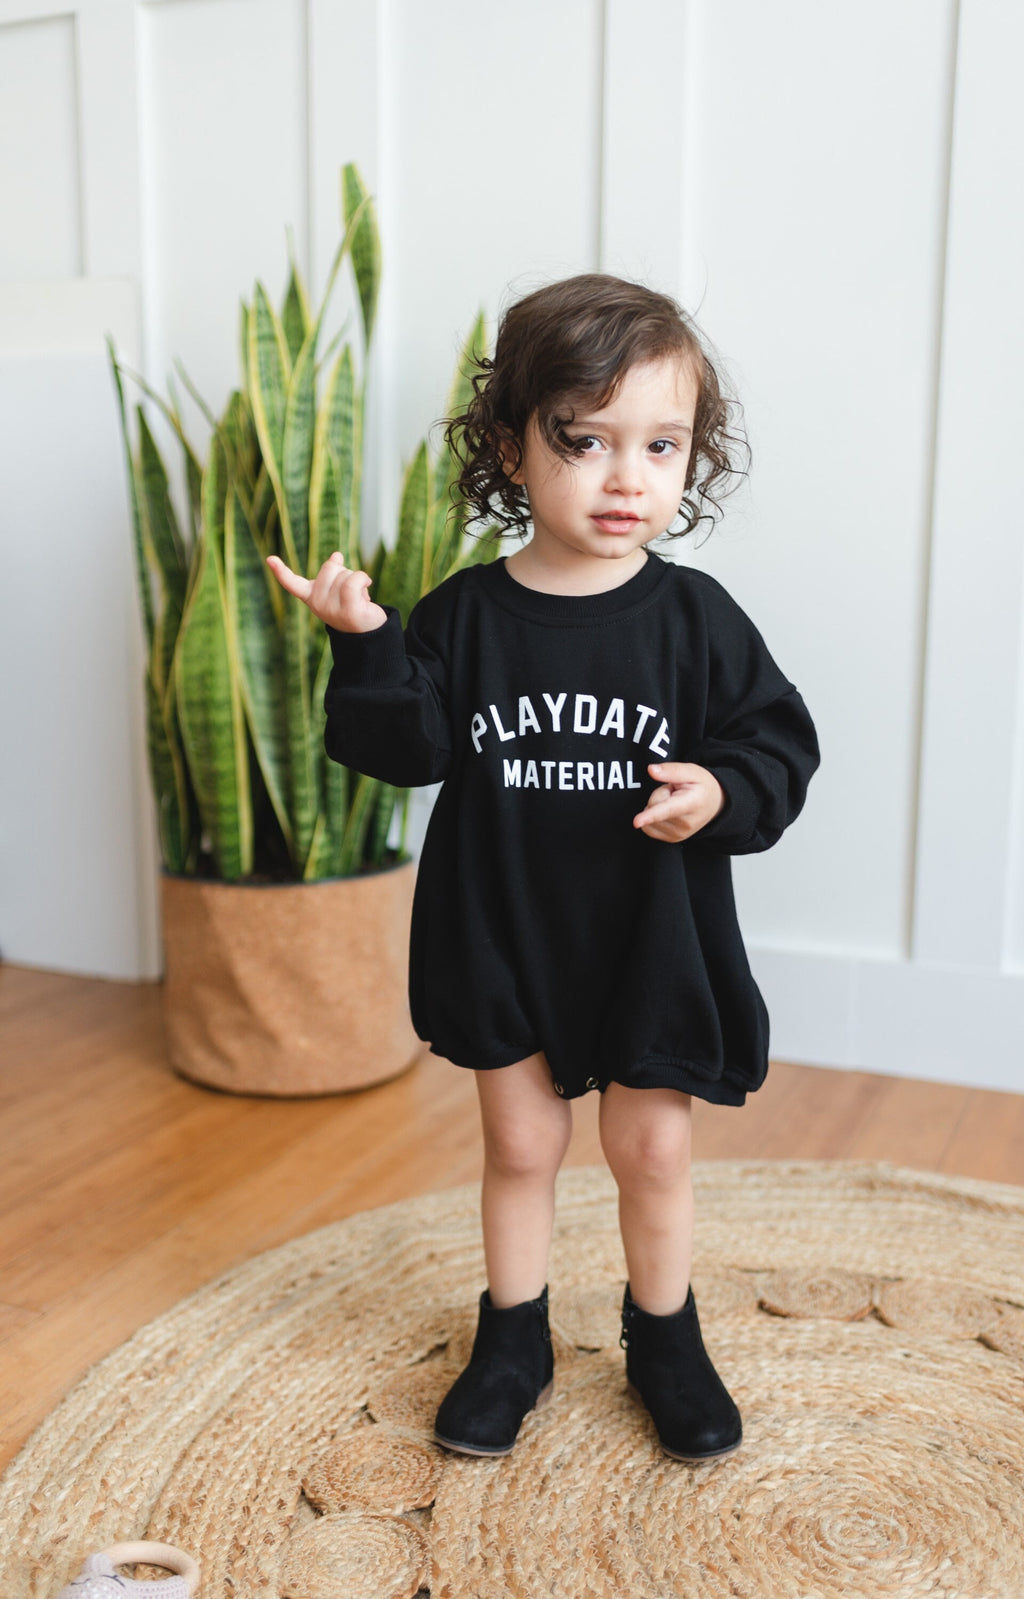 PLAYDATE MATERIAL Graphic Oversized Sweatshirt Romper - Sweatshirt Bubble Romper - Baby Boy Clothes - Play Date - Baby Boy Outfit